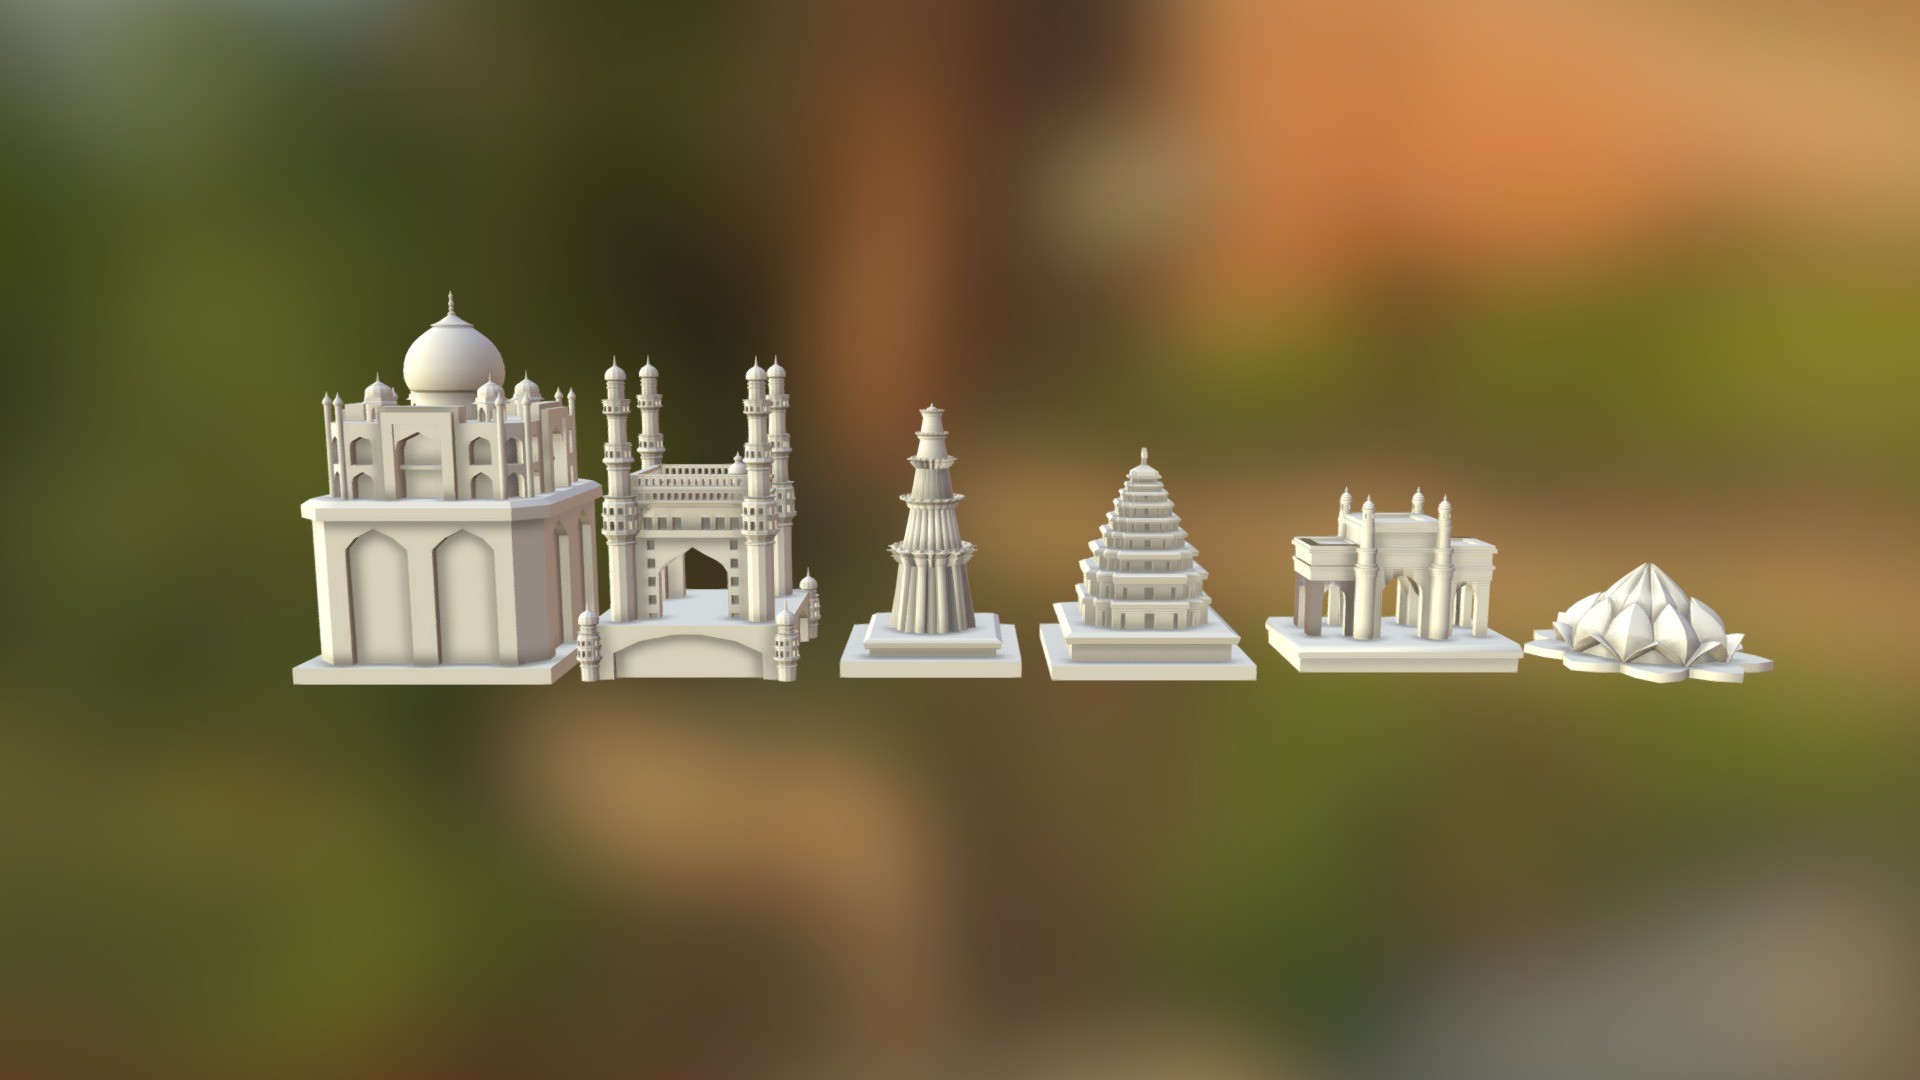 3D model Monuments Of India Chess Set - This is a 3D model of the Monuments Of India Chess Set. The 3D model is about a group of white buildings.